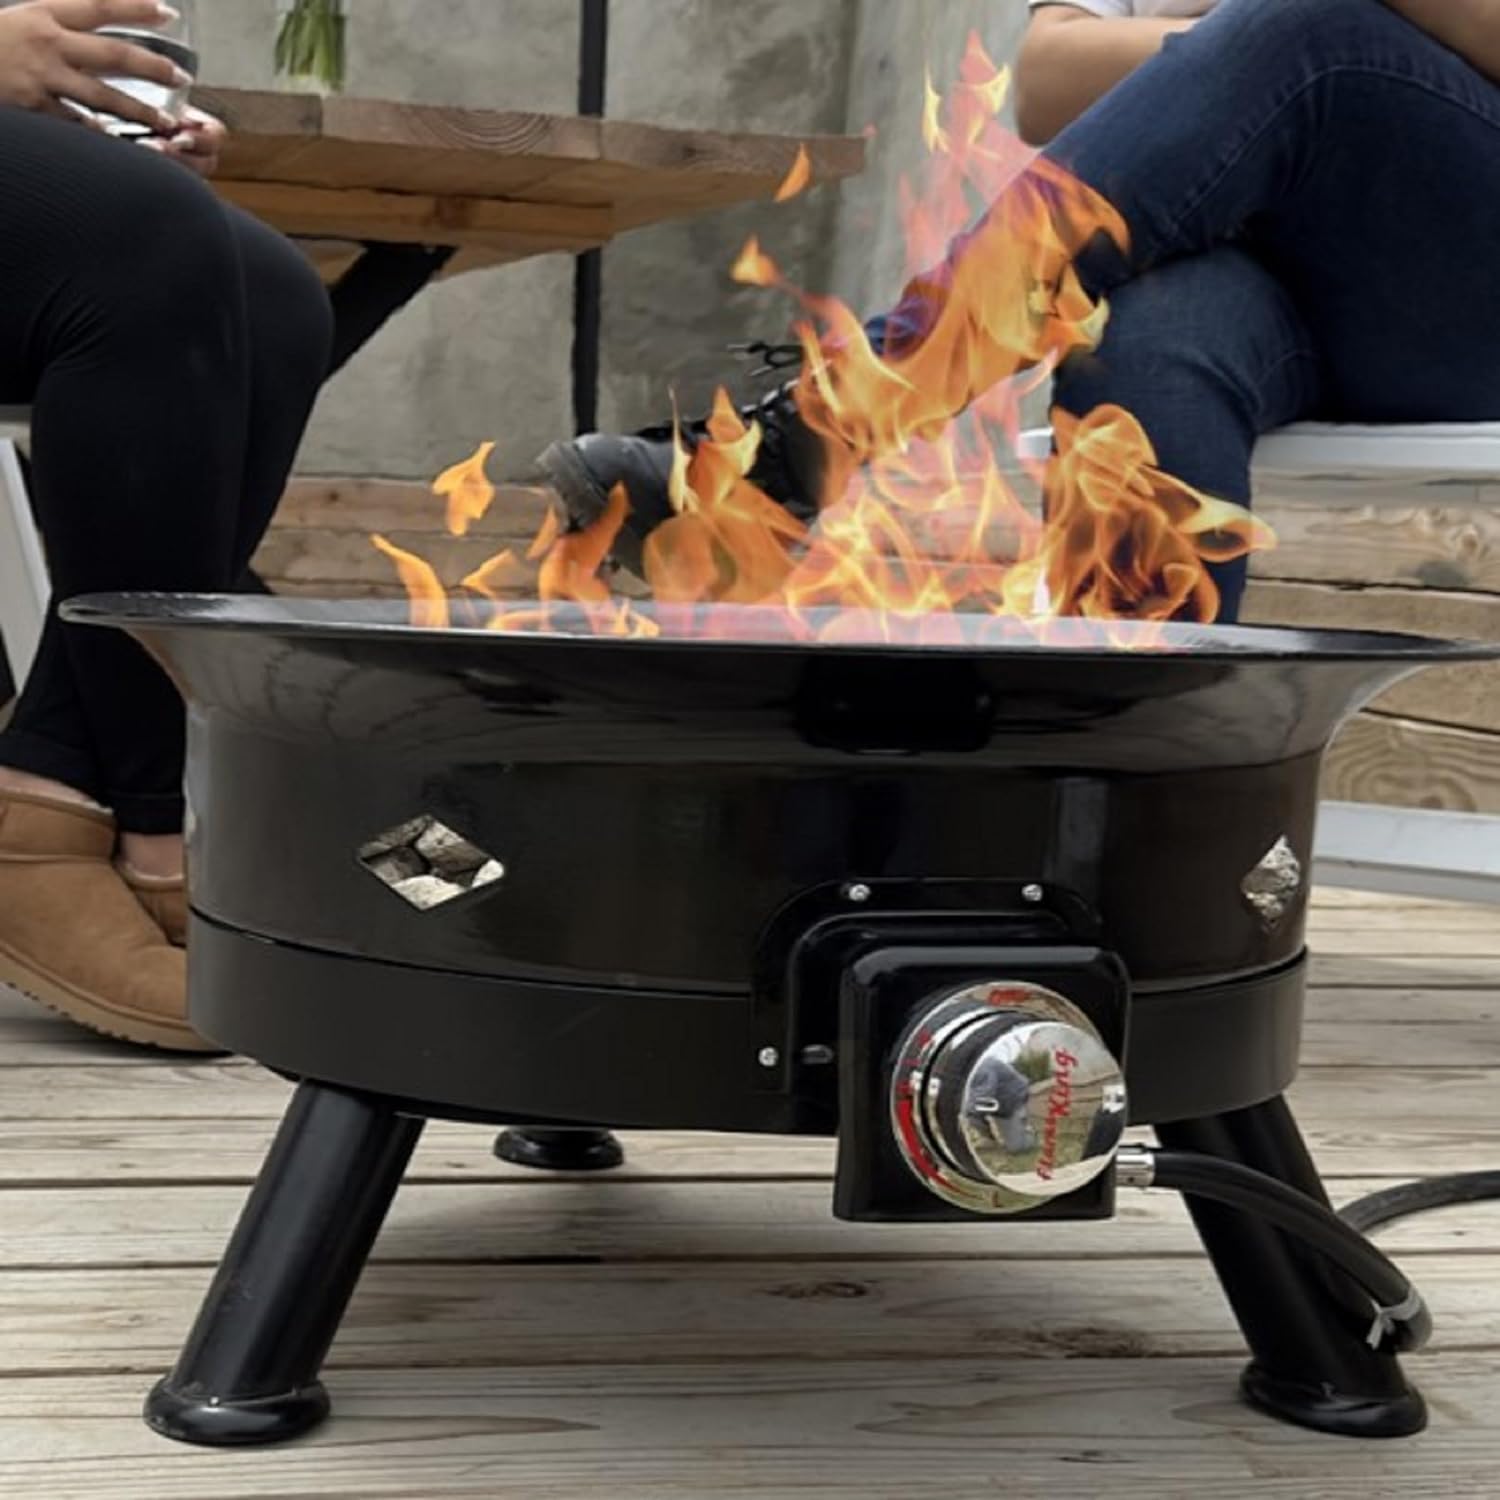 Flame King Smokeless Propane Fire Pit, 24-inch Portable Firebowl, 58K BTU with Self Igniter, Cover,  Carry Straps for RV, Camping,  Outdoor Living - Flame King Smokeless Propane Fire Pit Review